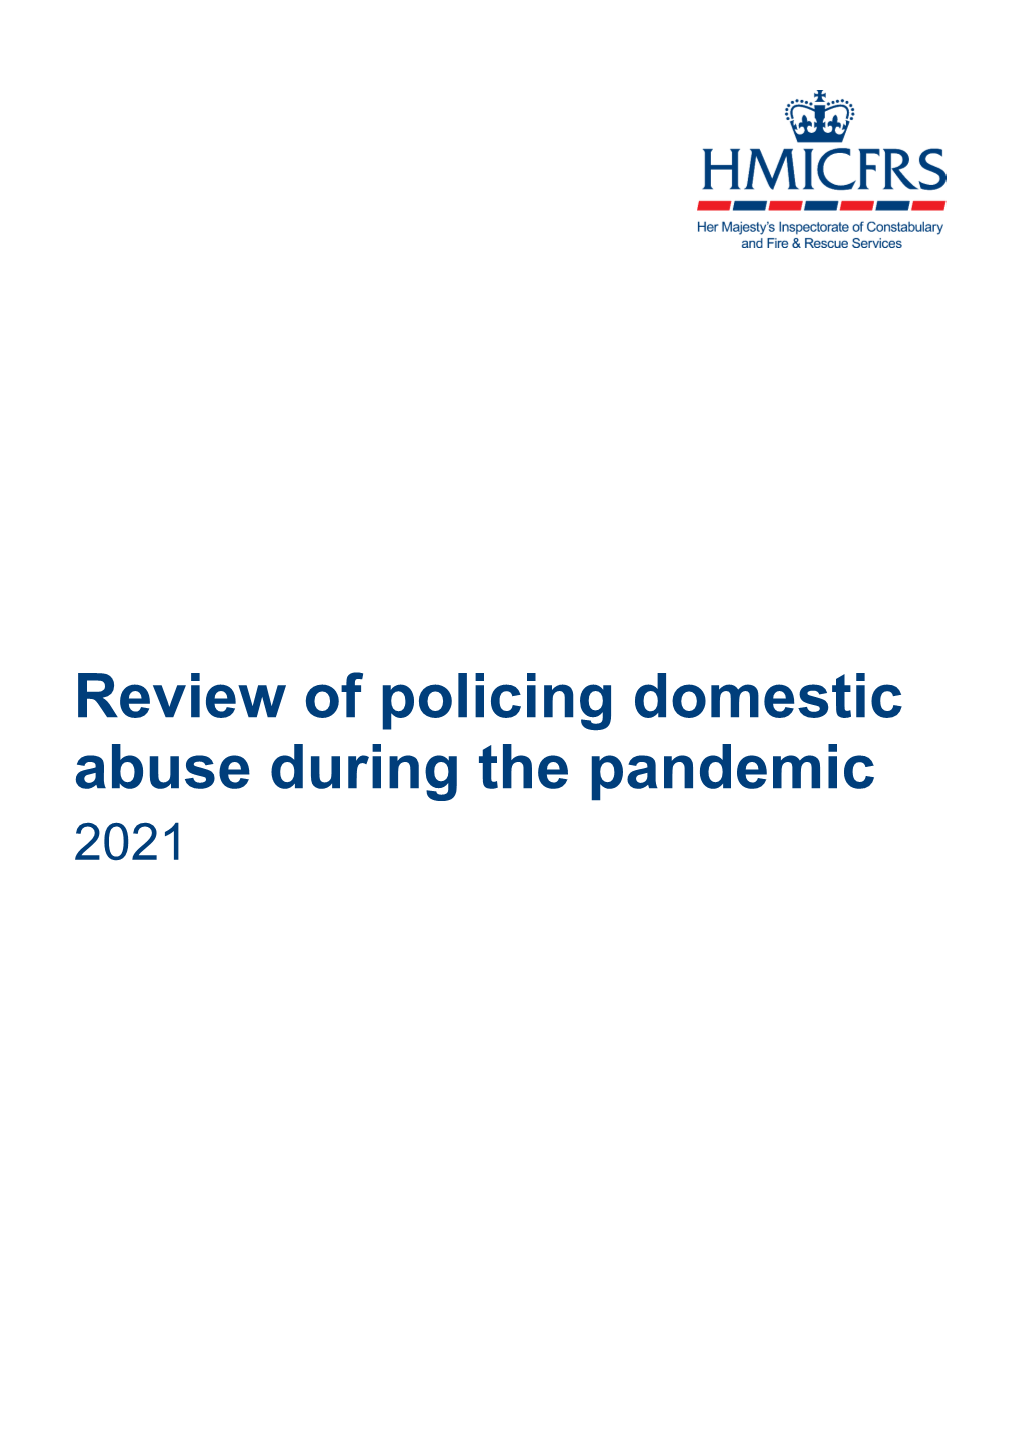 Review of Policing Domestic Abuse During the Pandemic: 2021